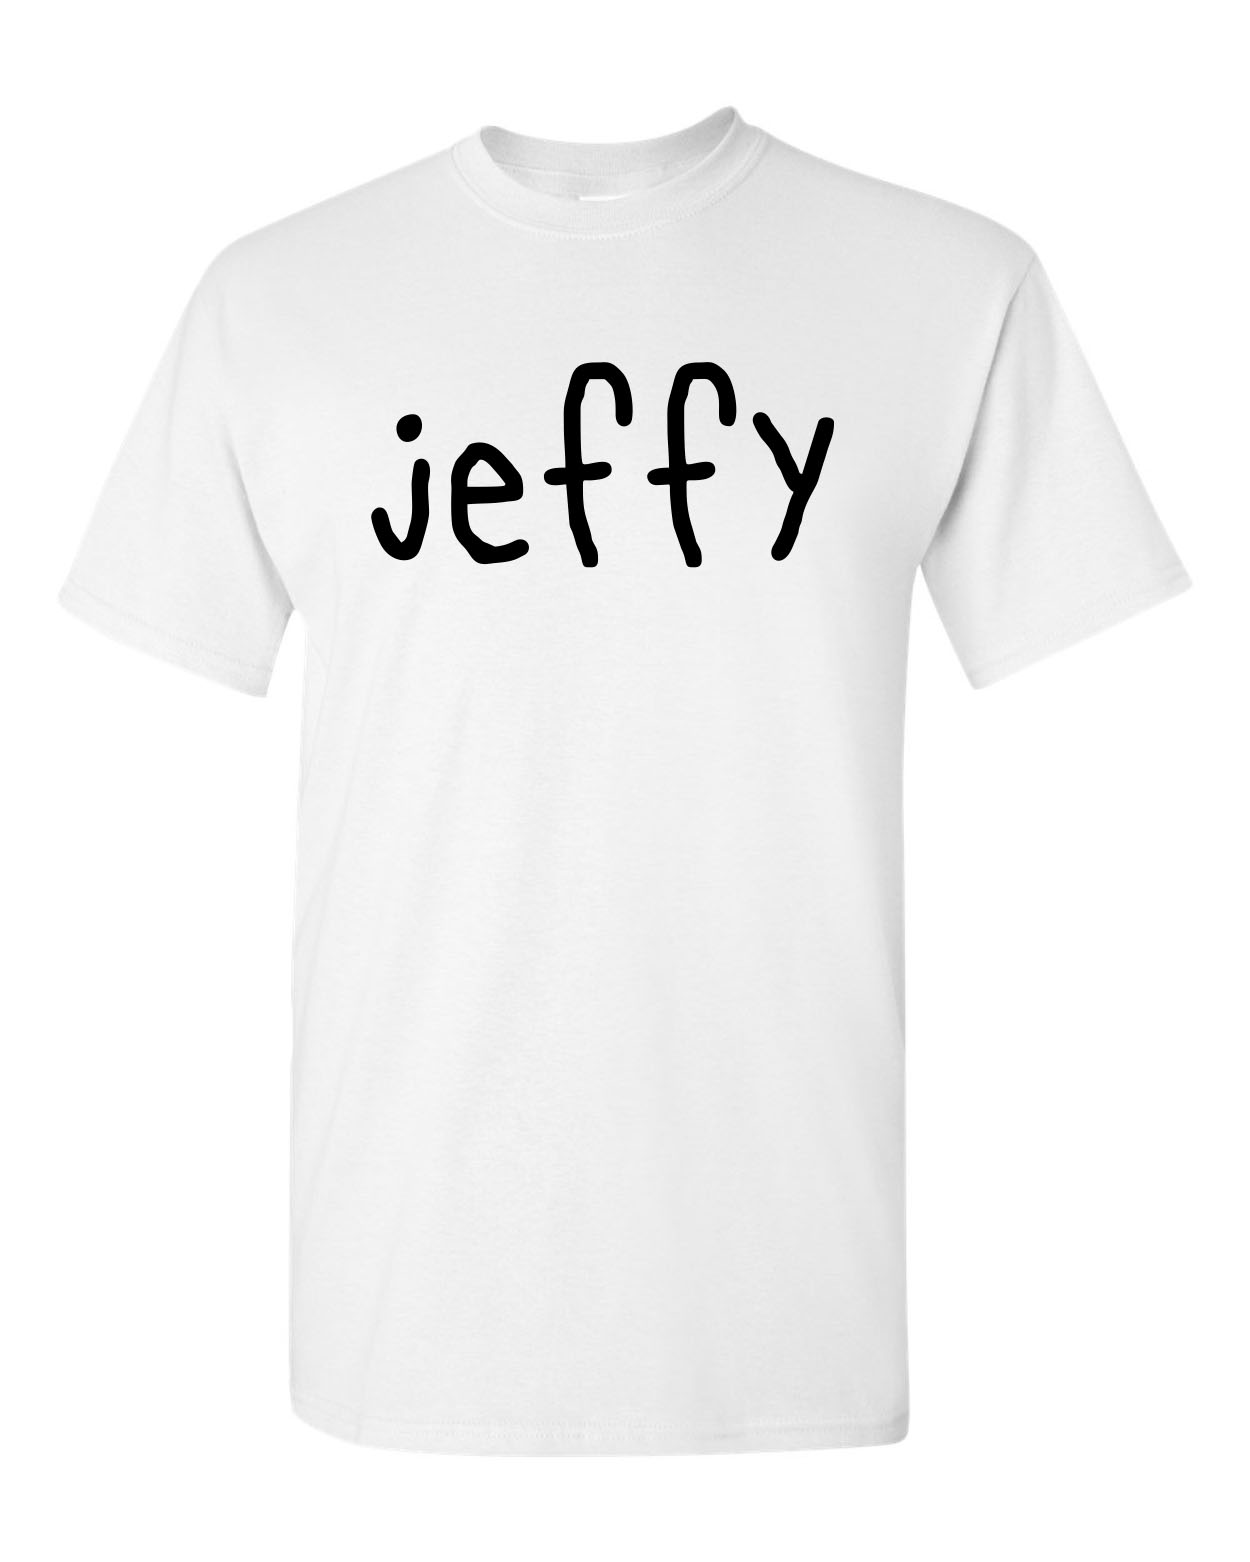 Jeffy Hanes Tagless Choose Either Youth New Men's Shirt Unisex Summer Casual Tee